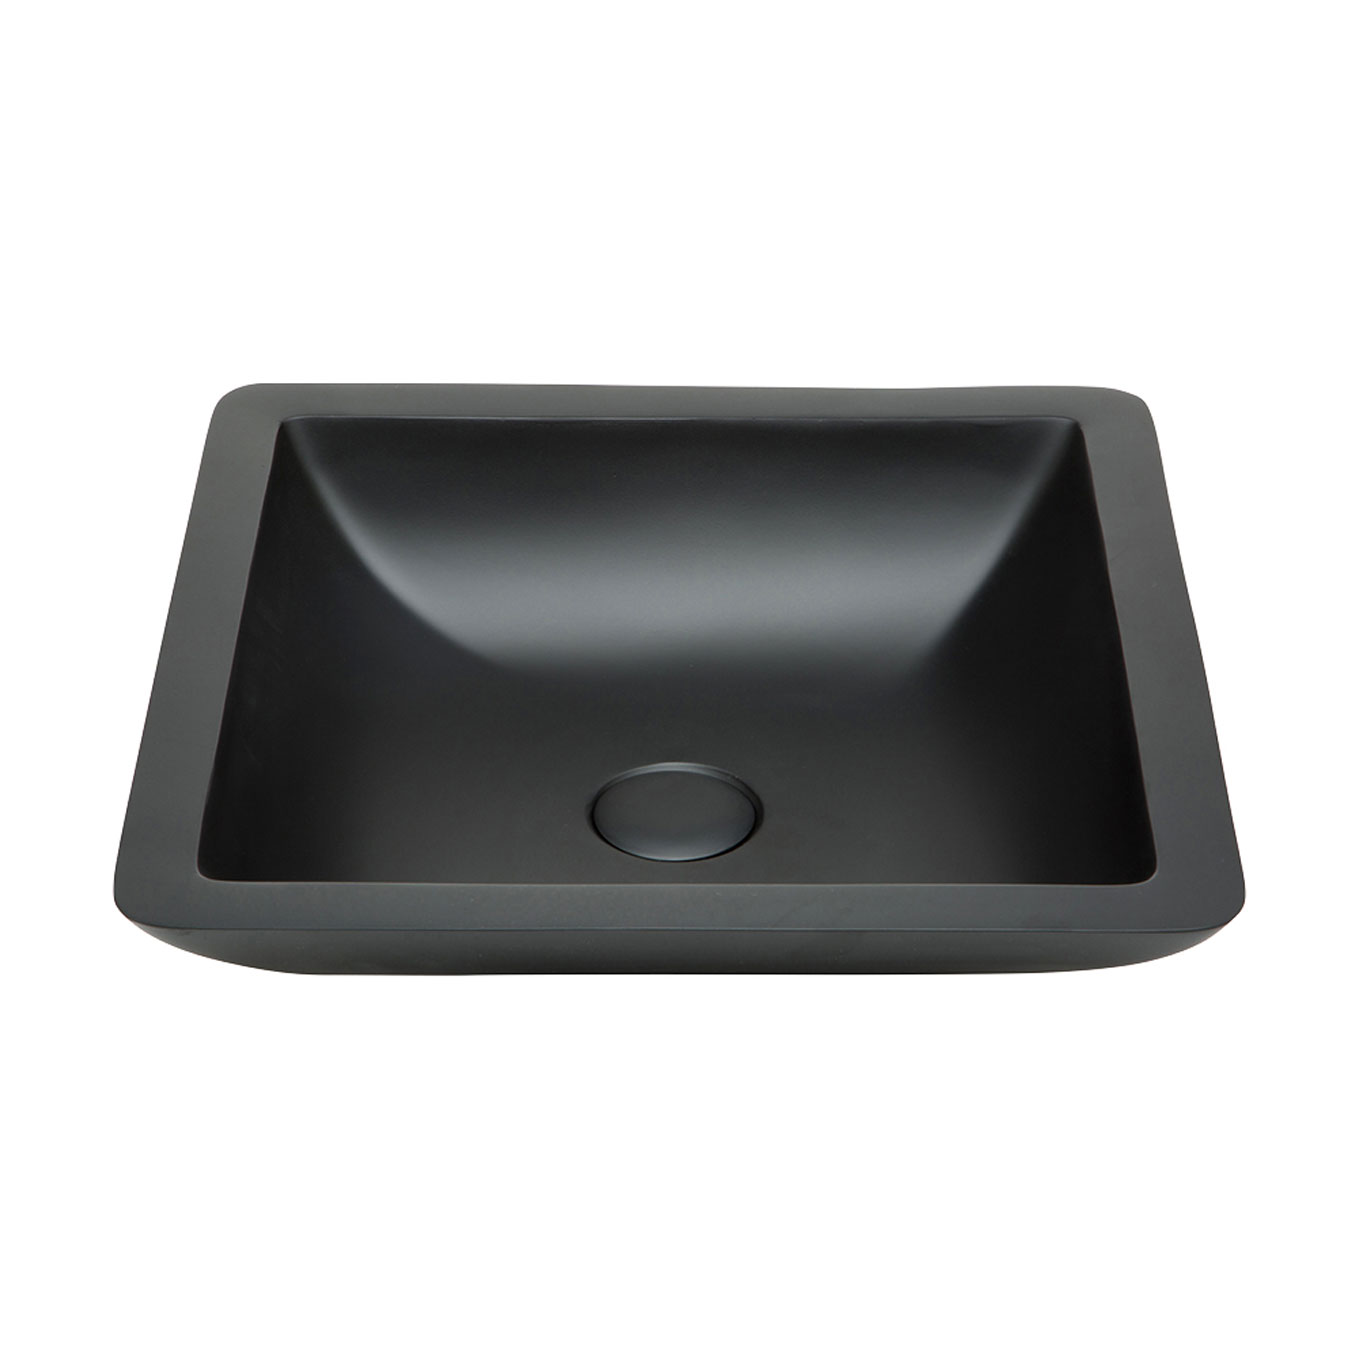 FIENZA CSB02-MB CLASSIQUE 420 SOLID SURFACE SQUARE ABOVE COUNTER BASIN MATTE BLACK